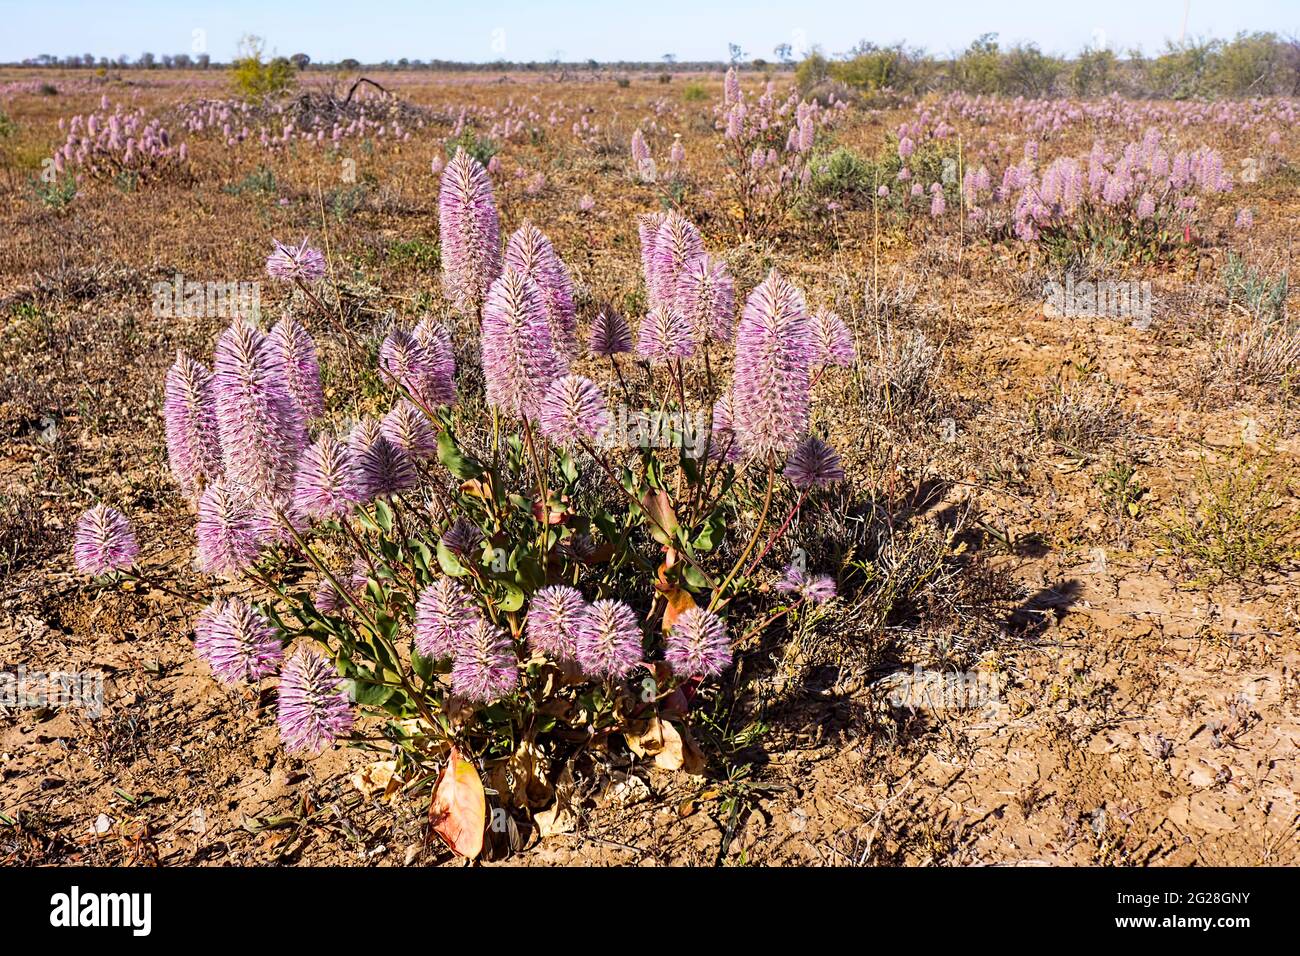 After a good rainy season outback Queensland is covered in fluffy pink mulla mulla flowers (Ptilotus Exaltatus) also known as lamb's tail or foxtail. Stock Photo